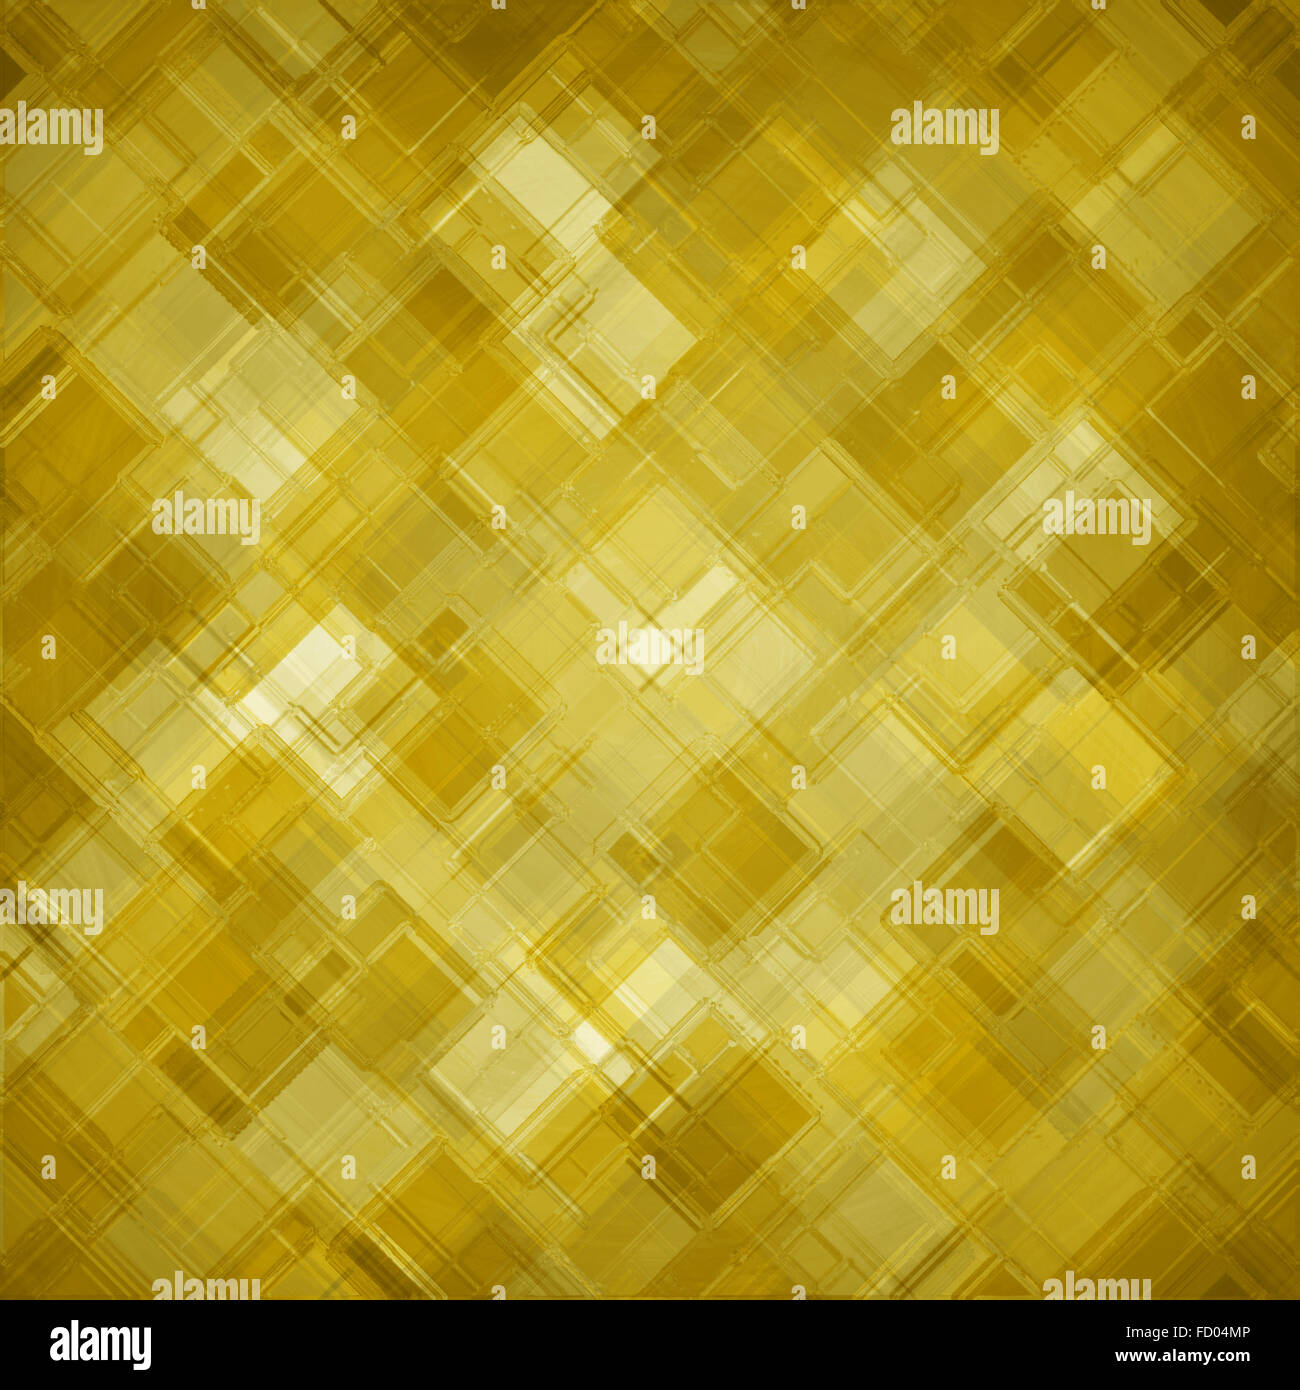 abstract gold background with angled geometric pattern Stock Photo